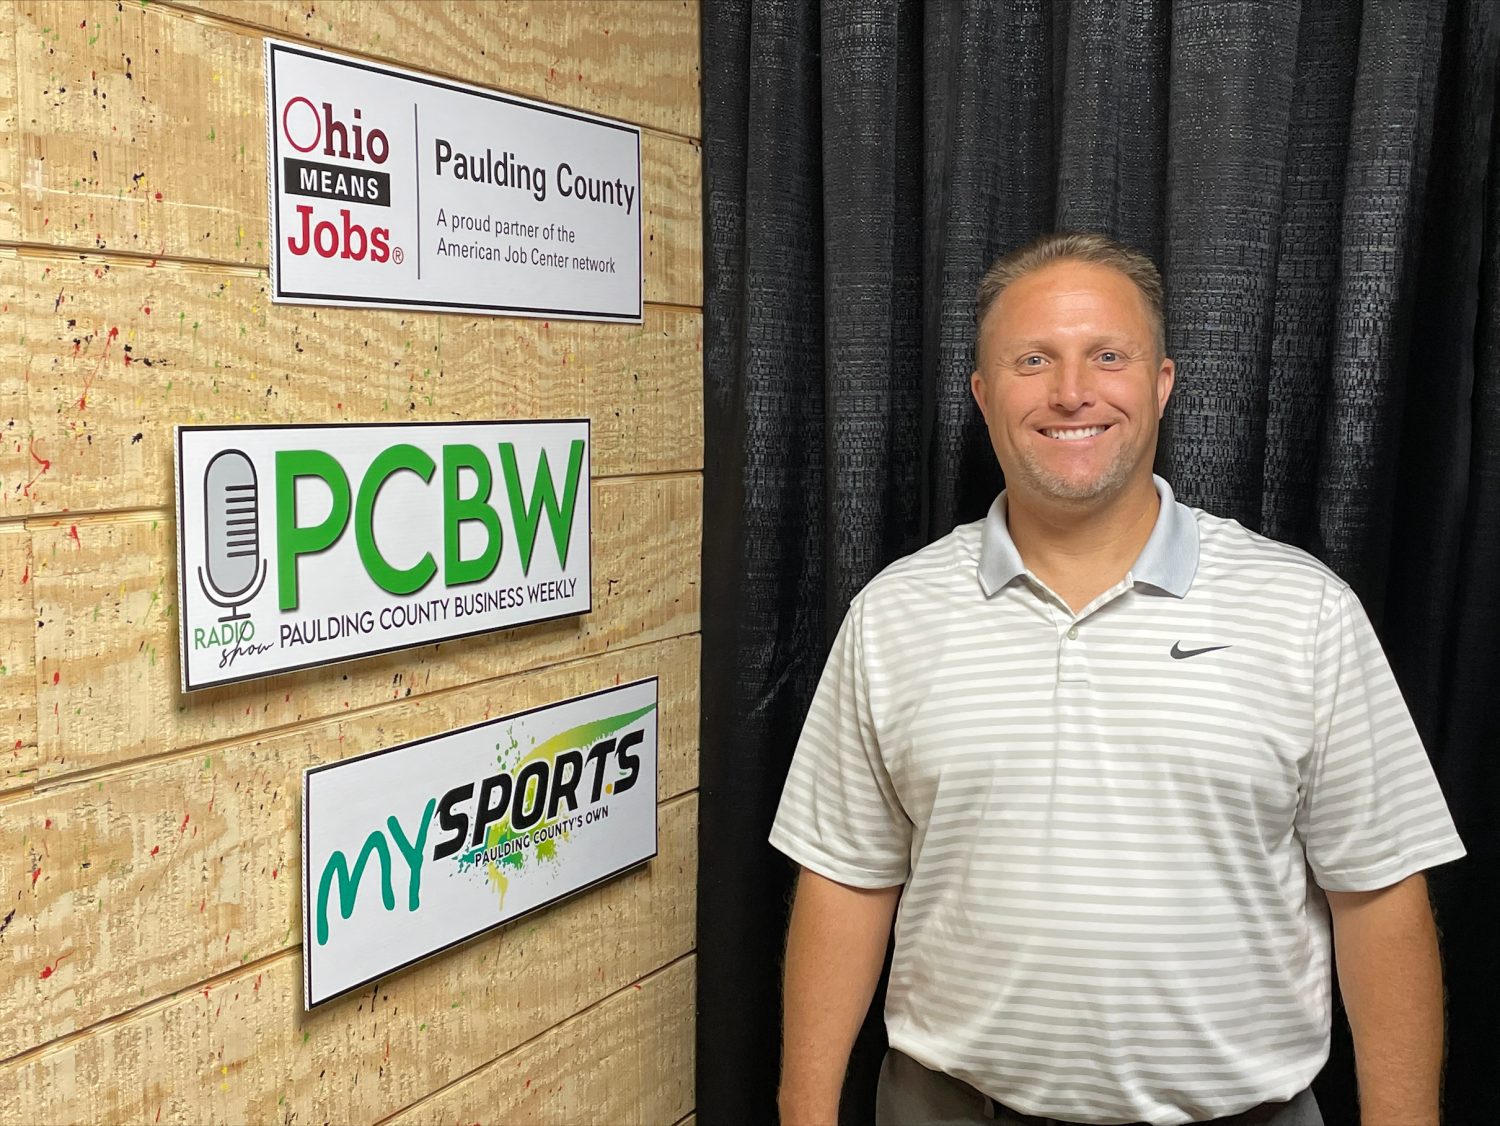 Next guest on Paulding County Business Weekly: Northwest State Community College